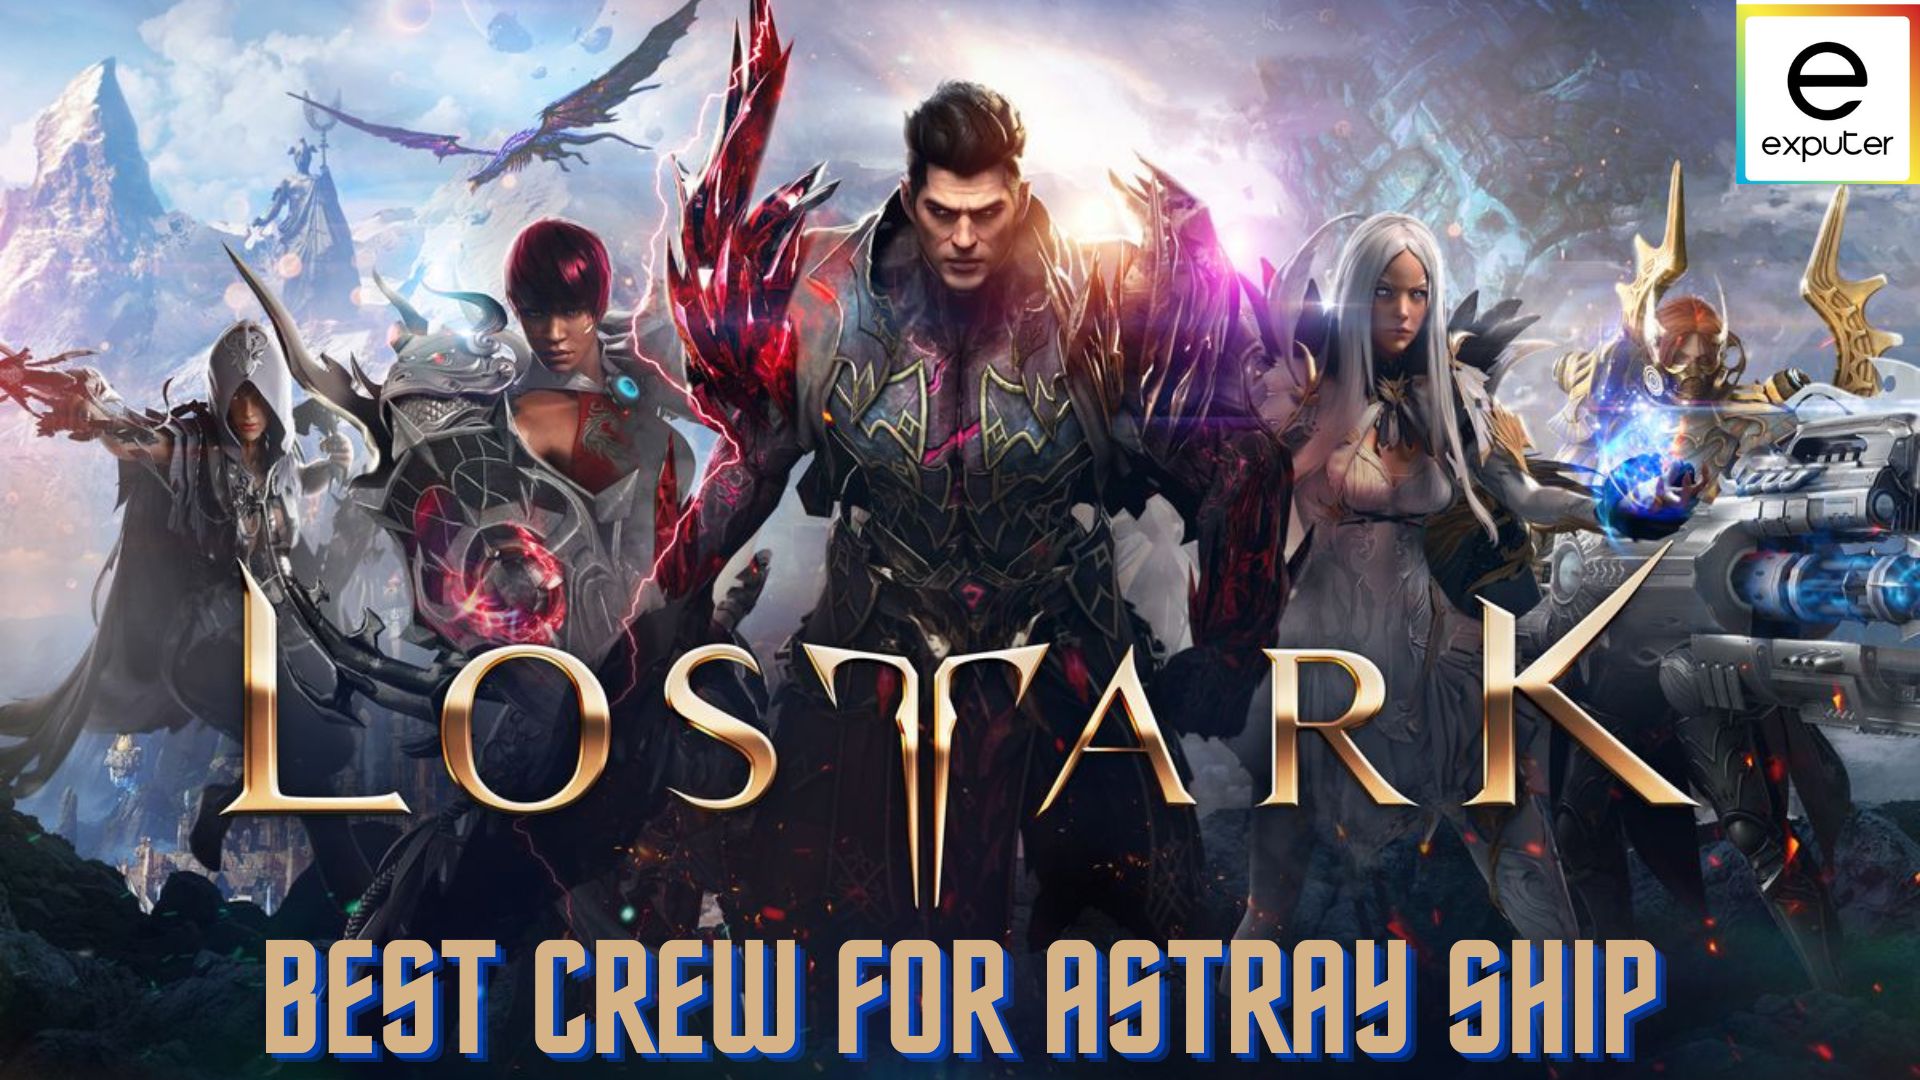 Best Crews for Astray Ship Lost Ark